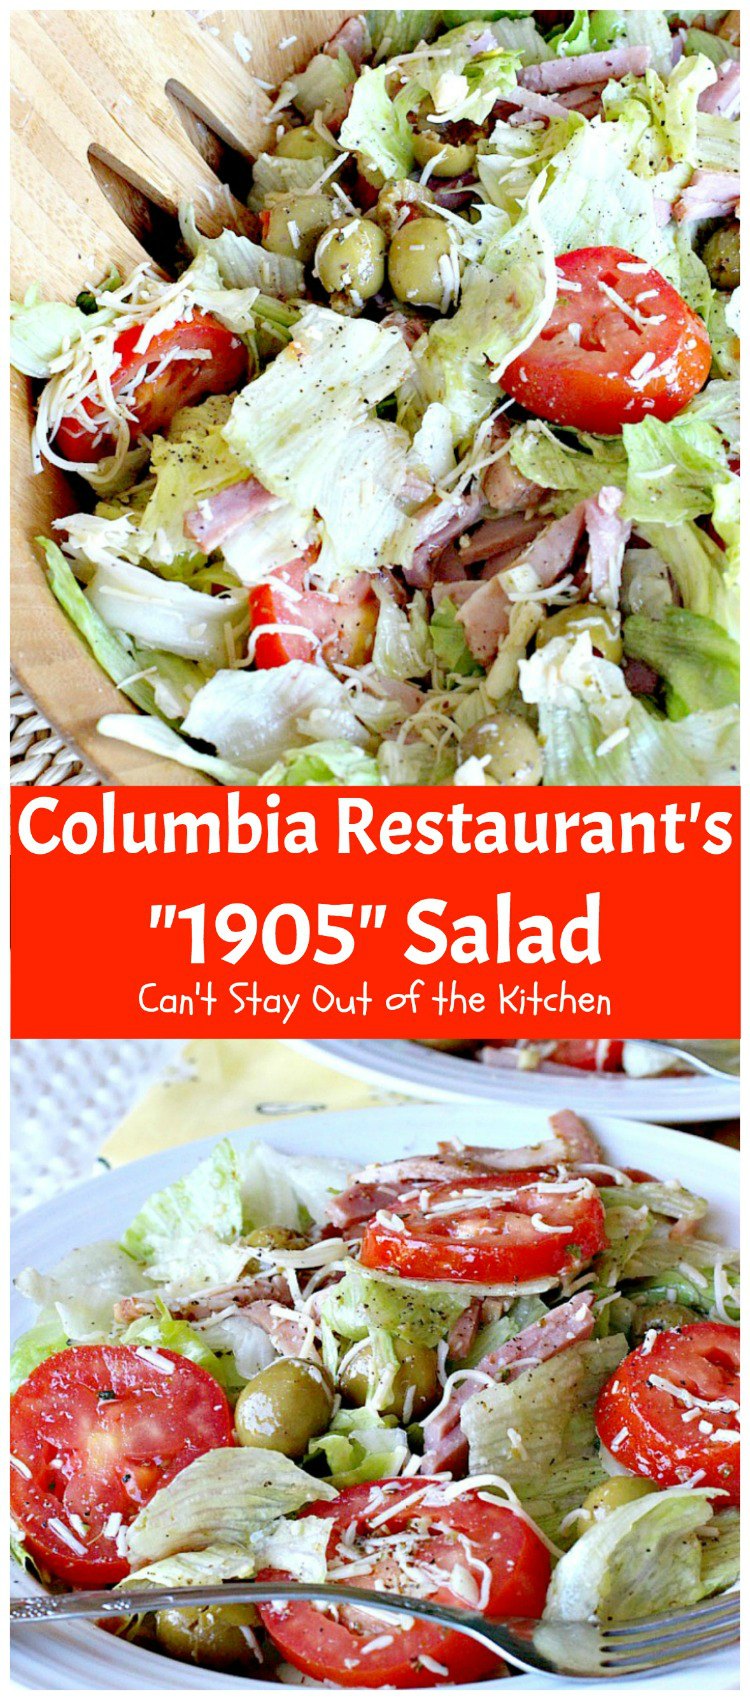 Columbia Restaurant's "1905" Salad | Can't Stay Out of the Kitchen